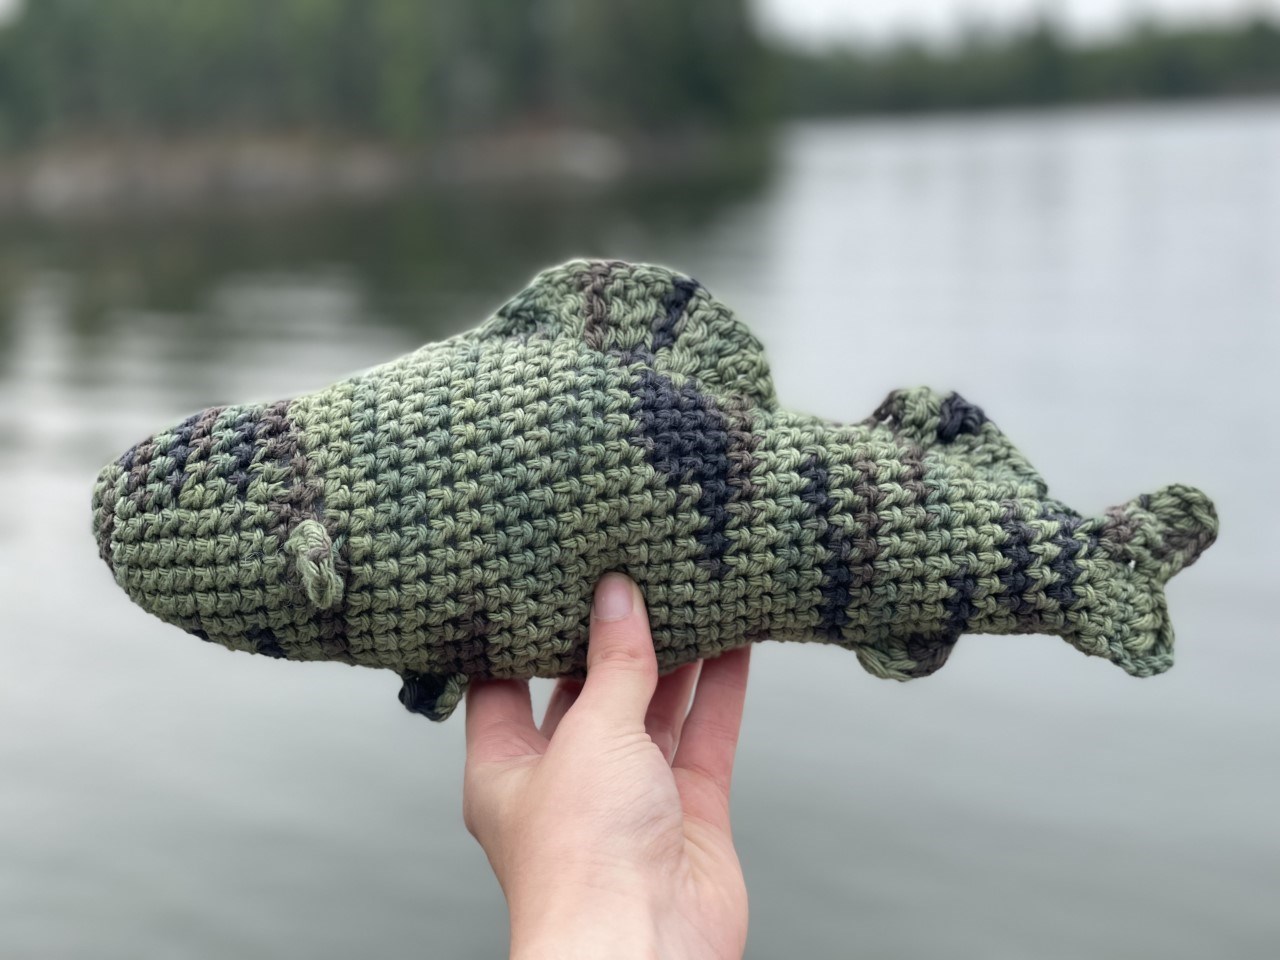 A crocheted fishing being held by a hand in front of a lake.